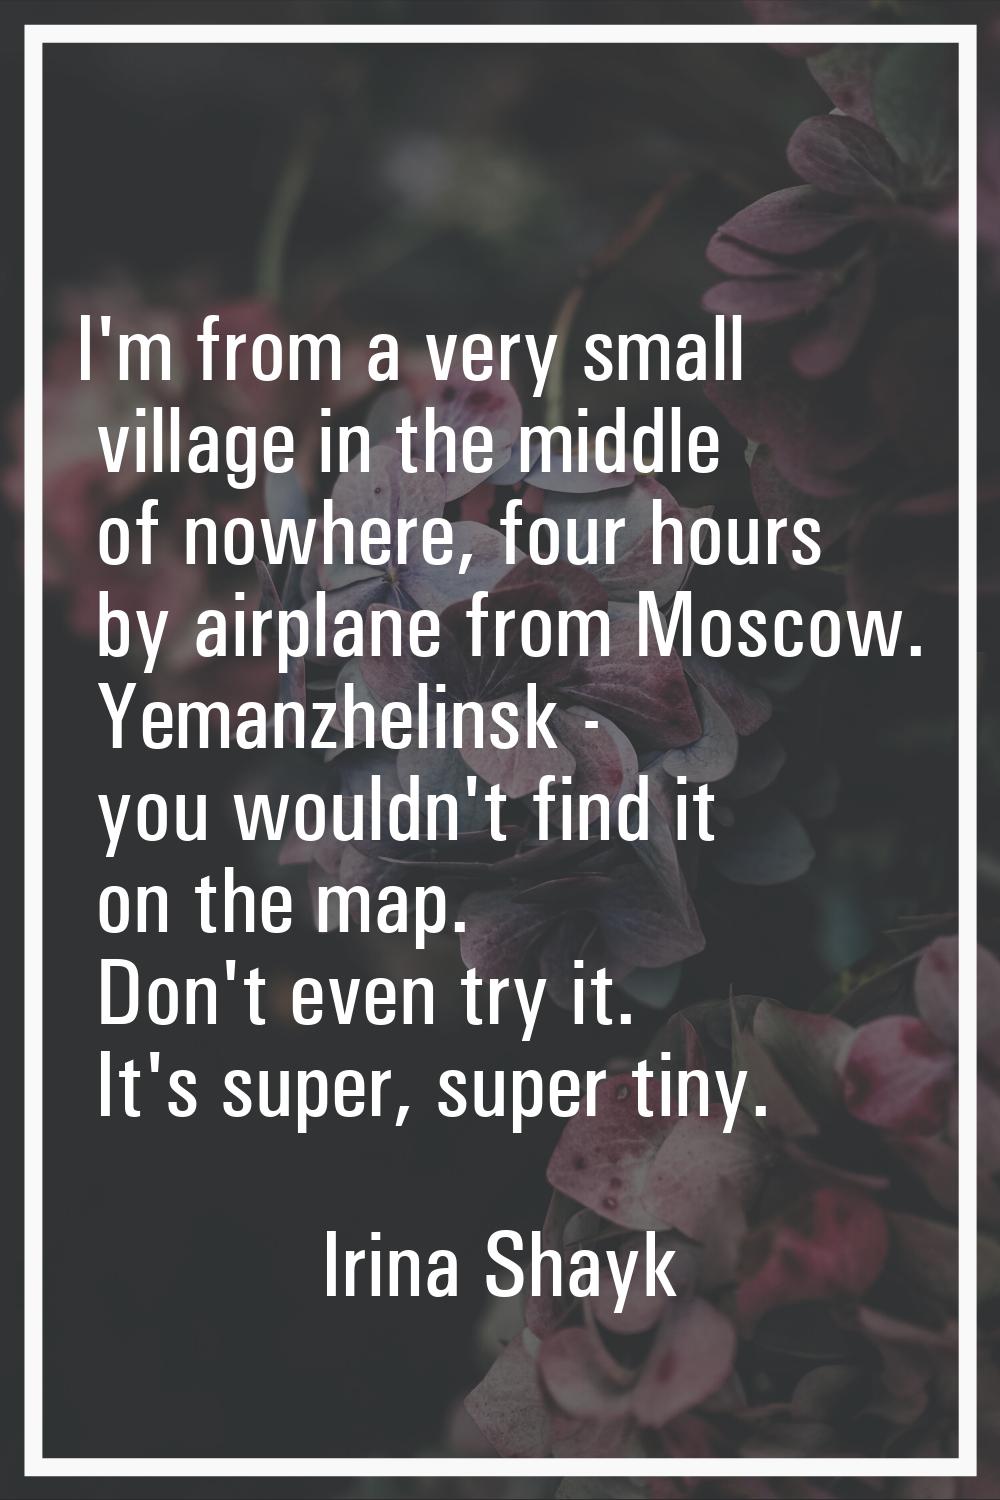 I'm from a very small village in the middle of nowhere, four hours by airplane from Moscow. Yemanzh